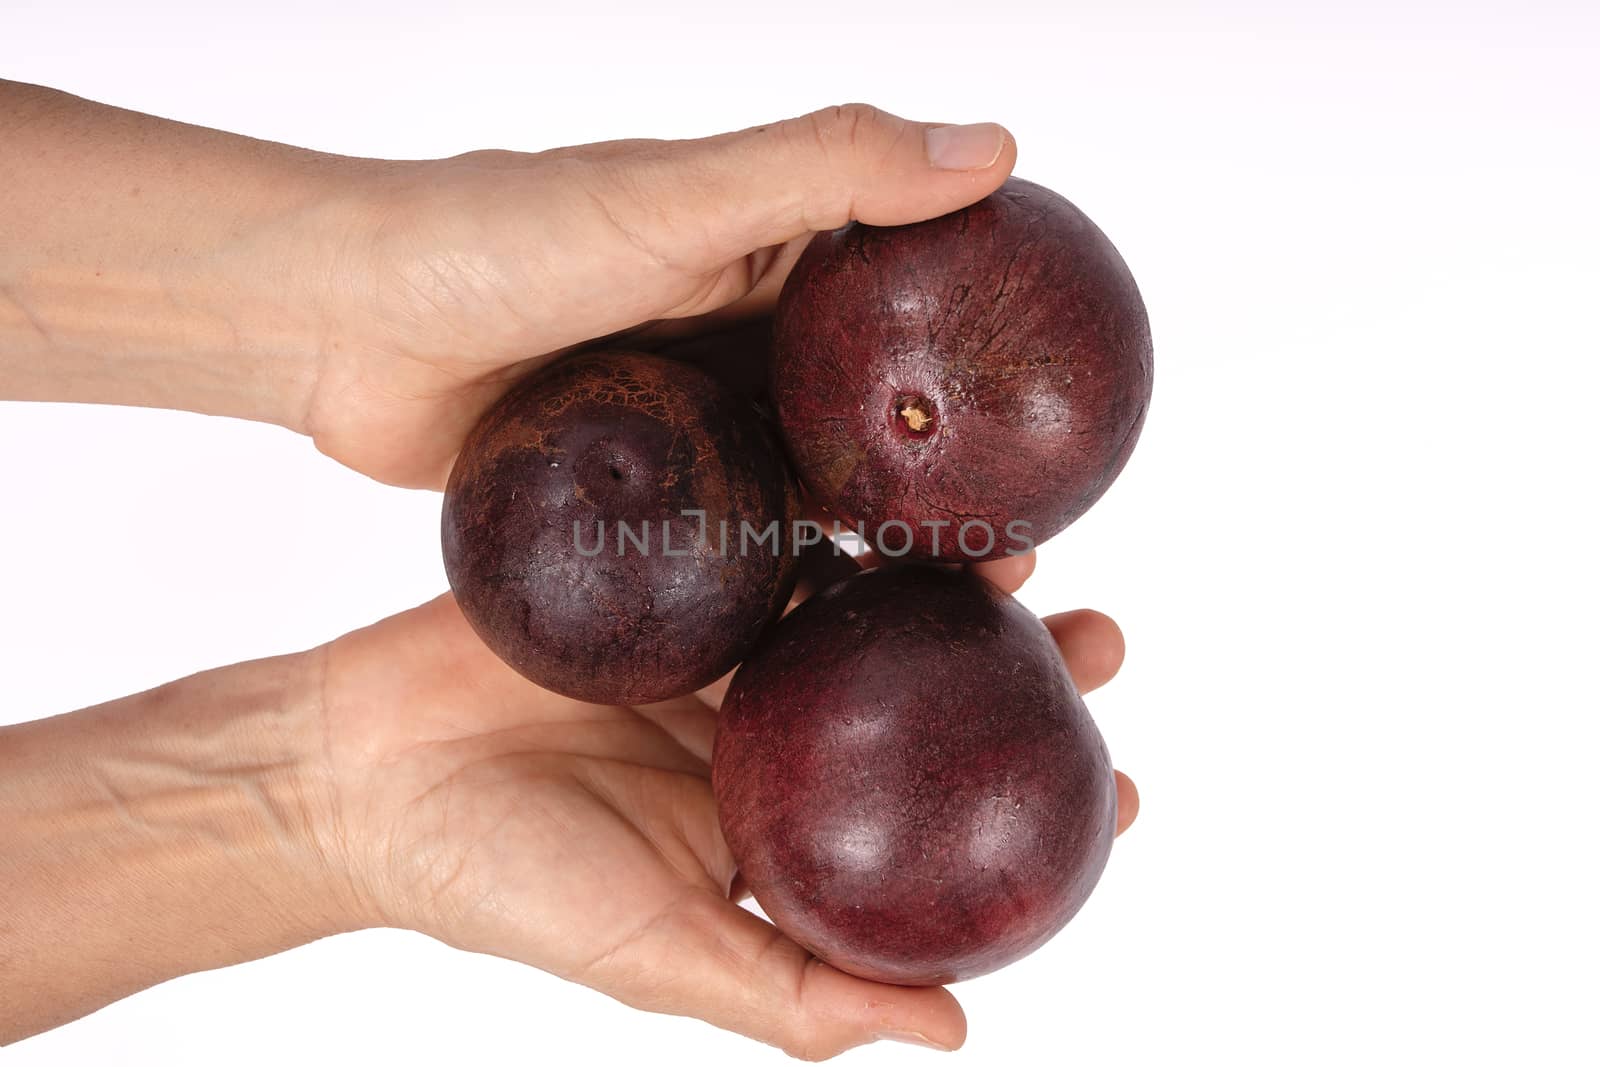 Three caimito fruits held by two hands and a white background